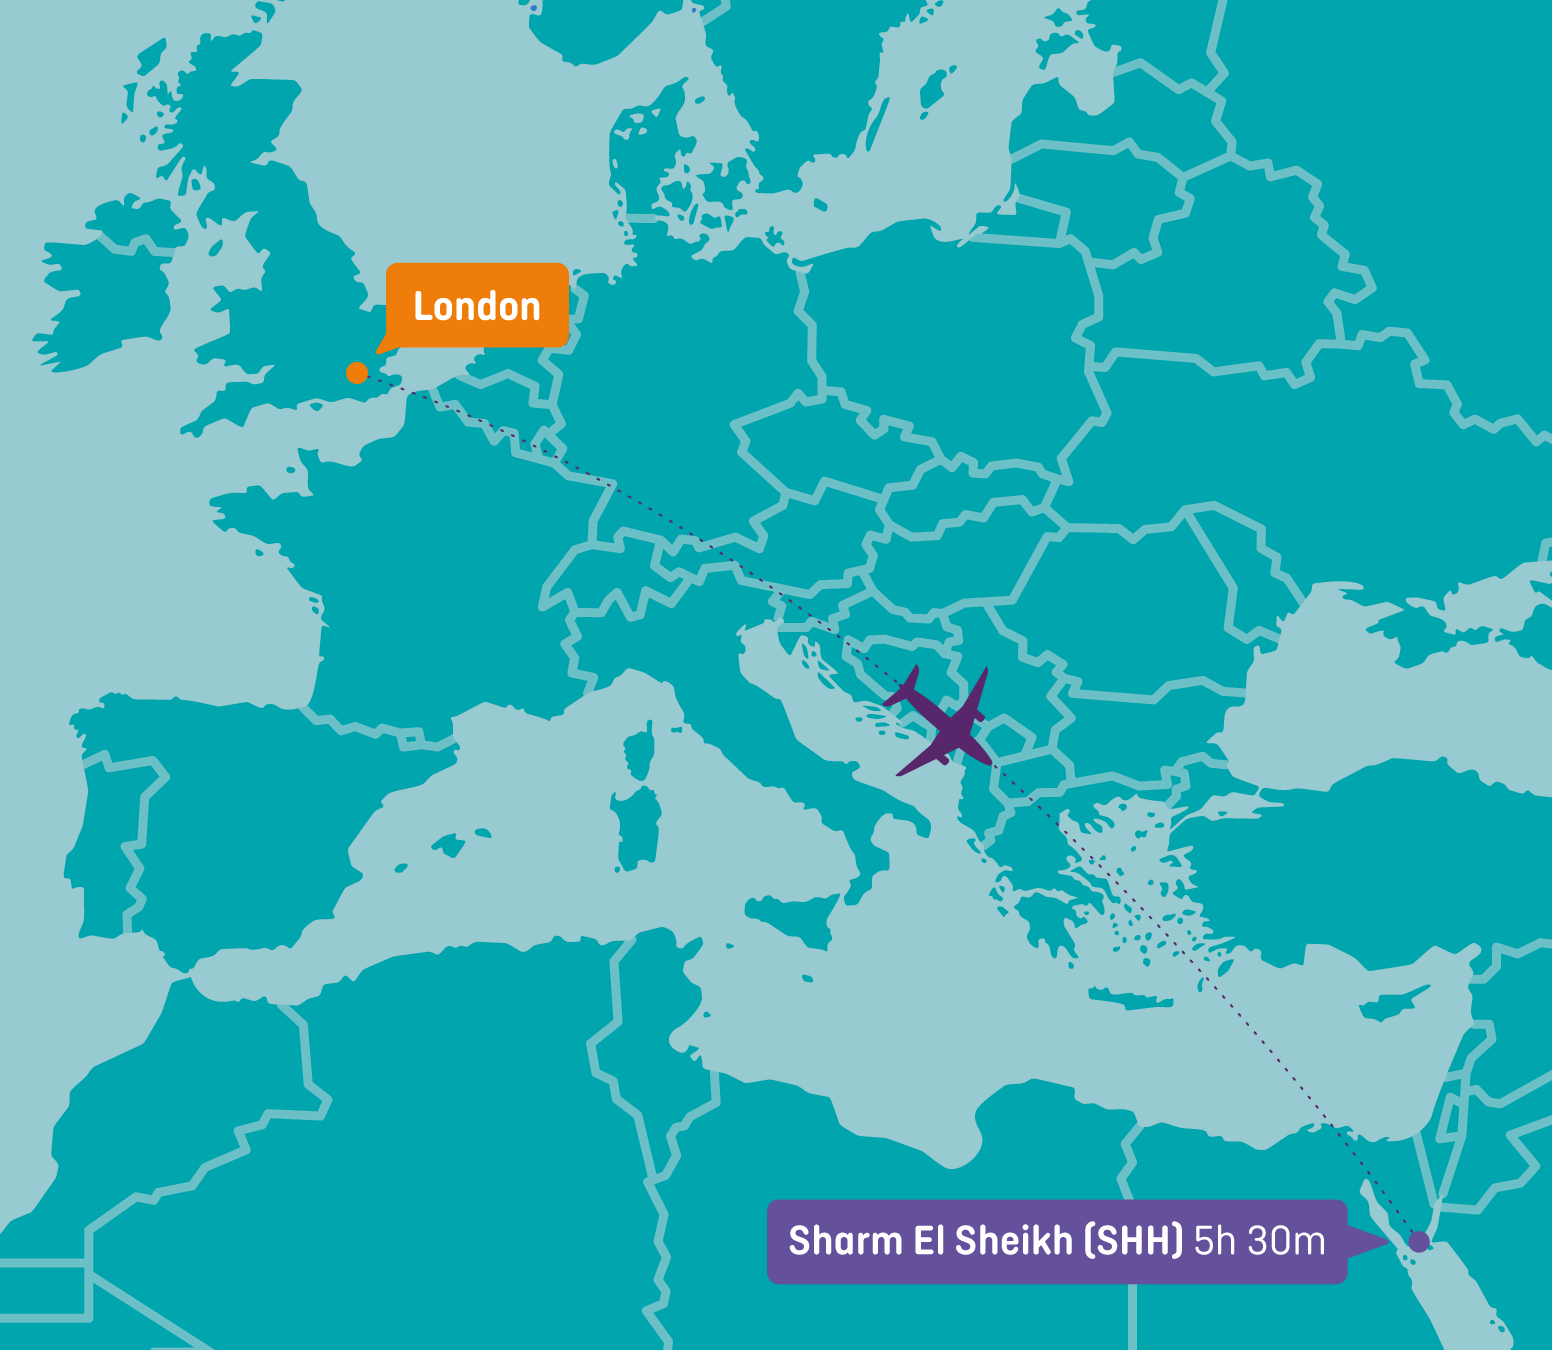  Staysure branded map with an icon of an aeroplane flying from London to Sharm El Sheikh. 